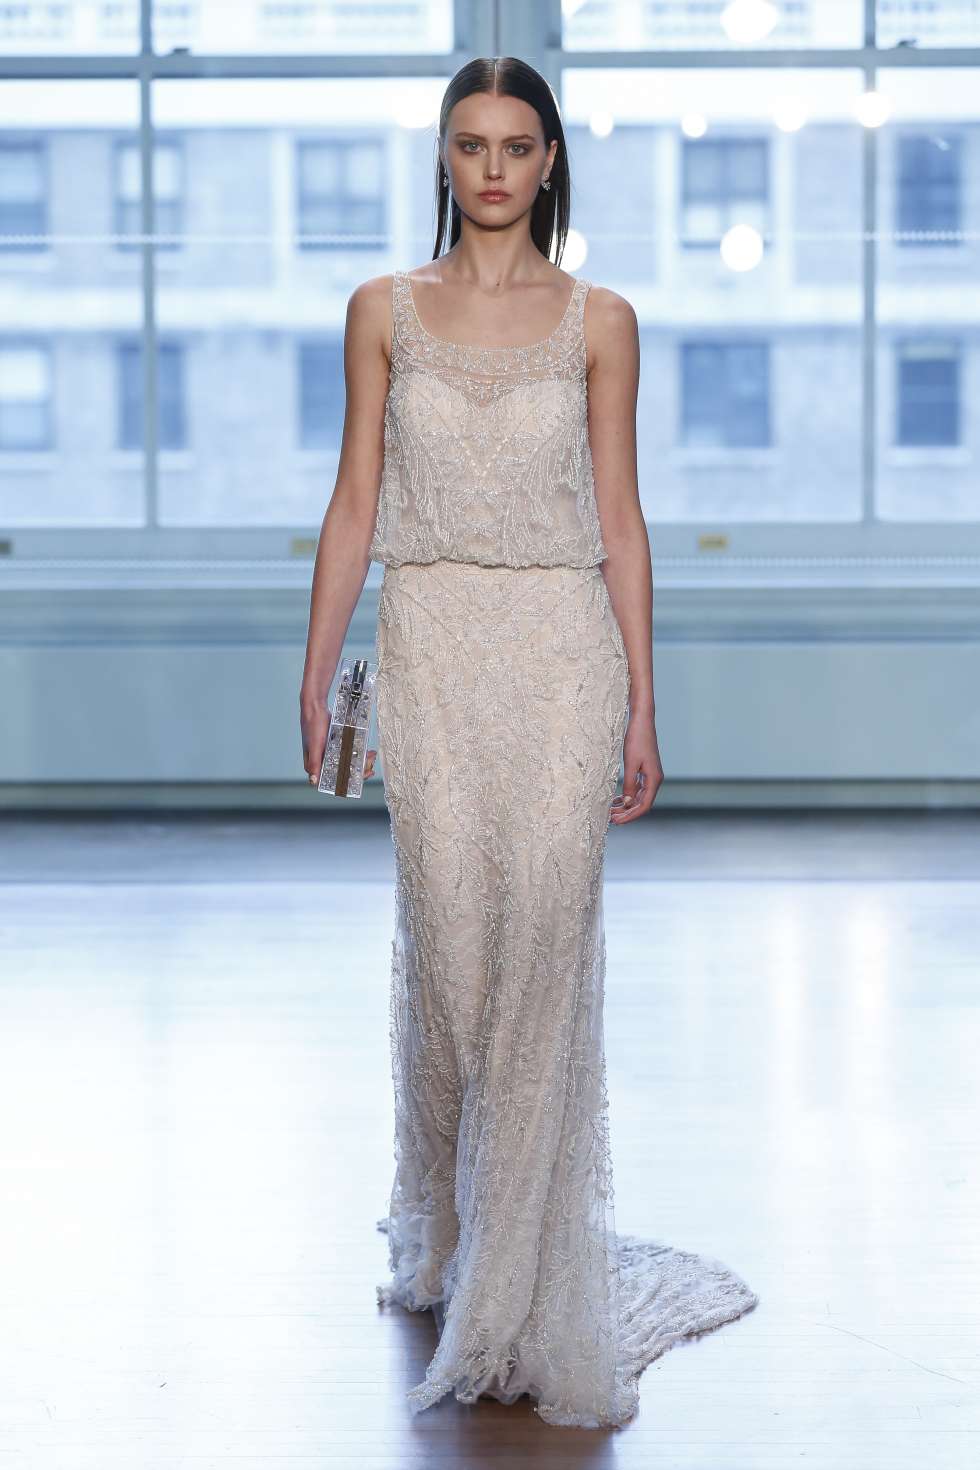 The 2019 Spring/Summer Wedding Dress Collection By Justin Alexander